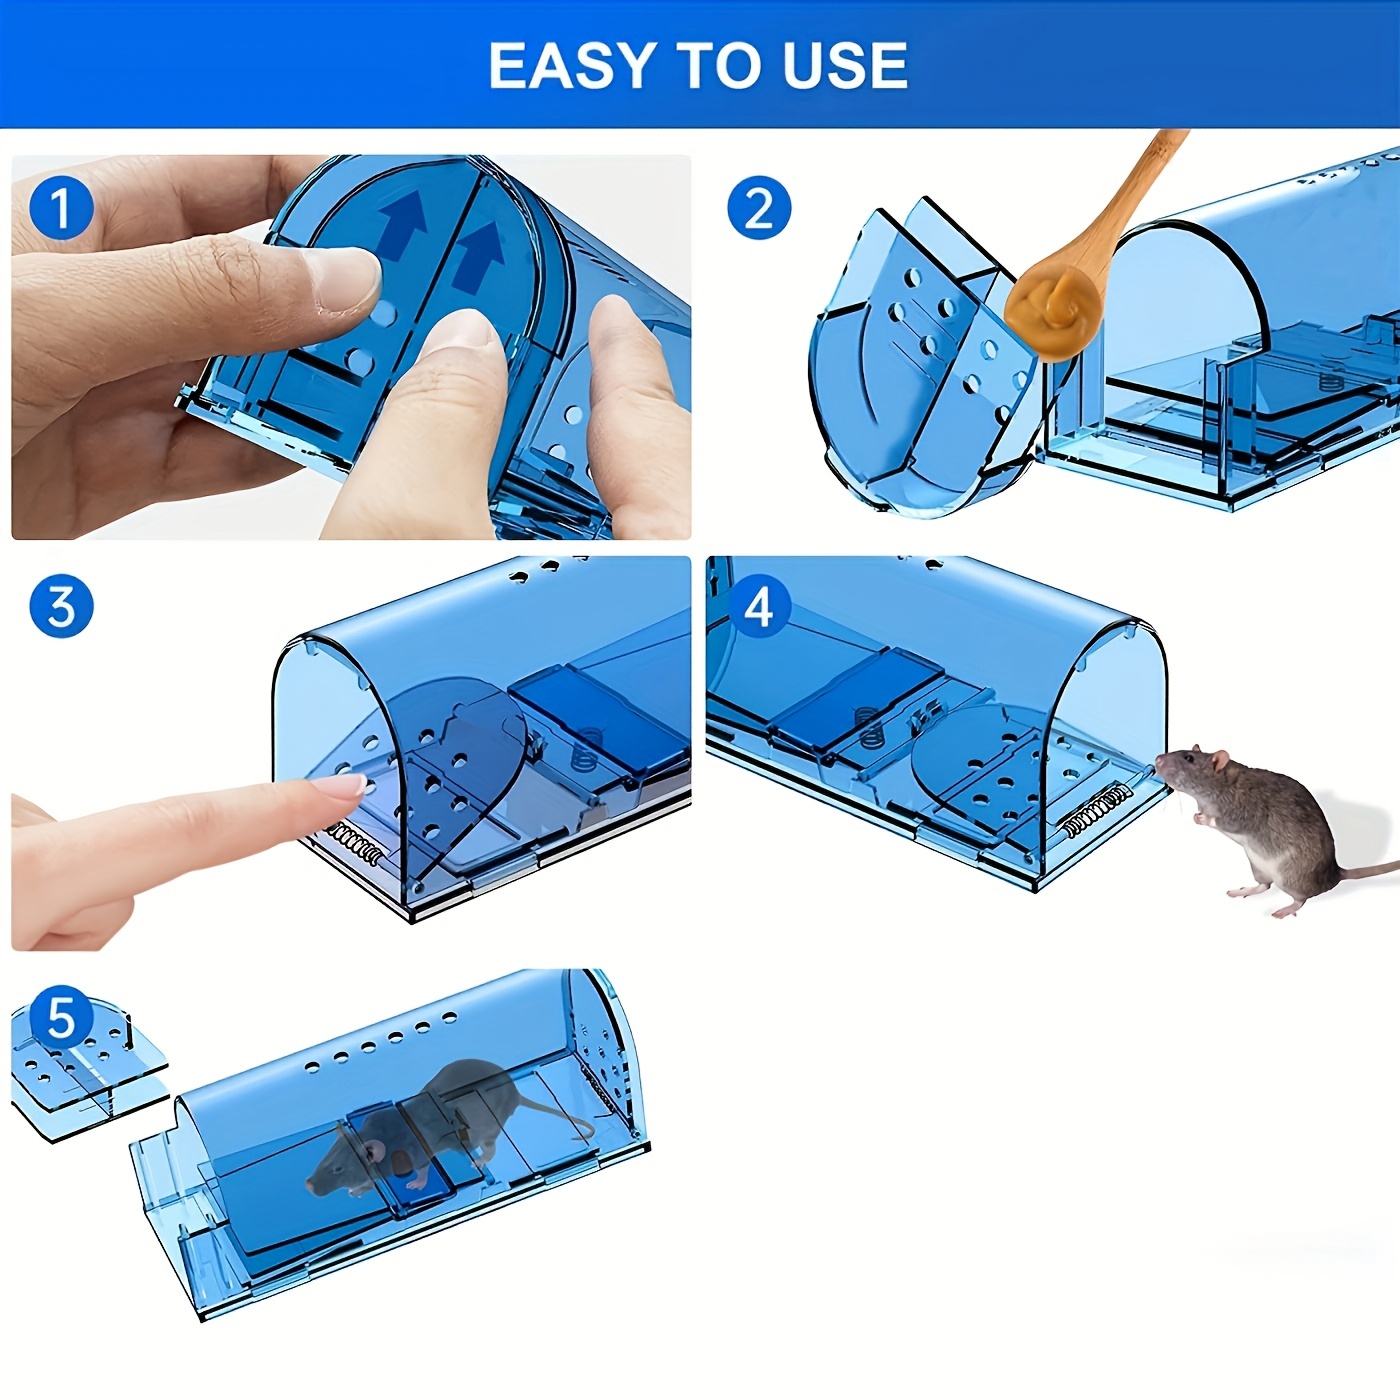 Original Humane Mouse Traps, Easy to Set, Kids/Pets Safe, Reusable for Indoor/Outdoor Use, for Small Rodent/Voles/Hamsters/Moles Catcher That Works